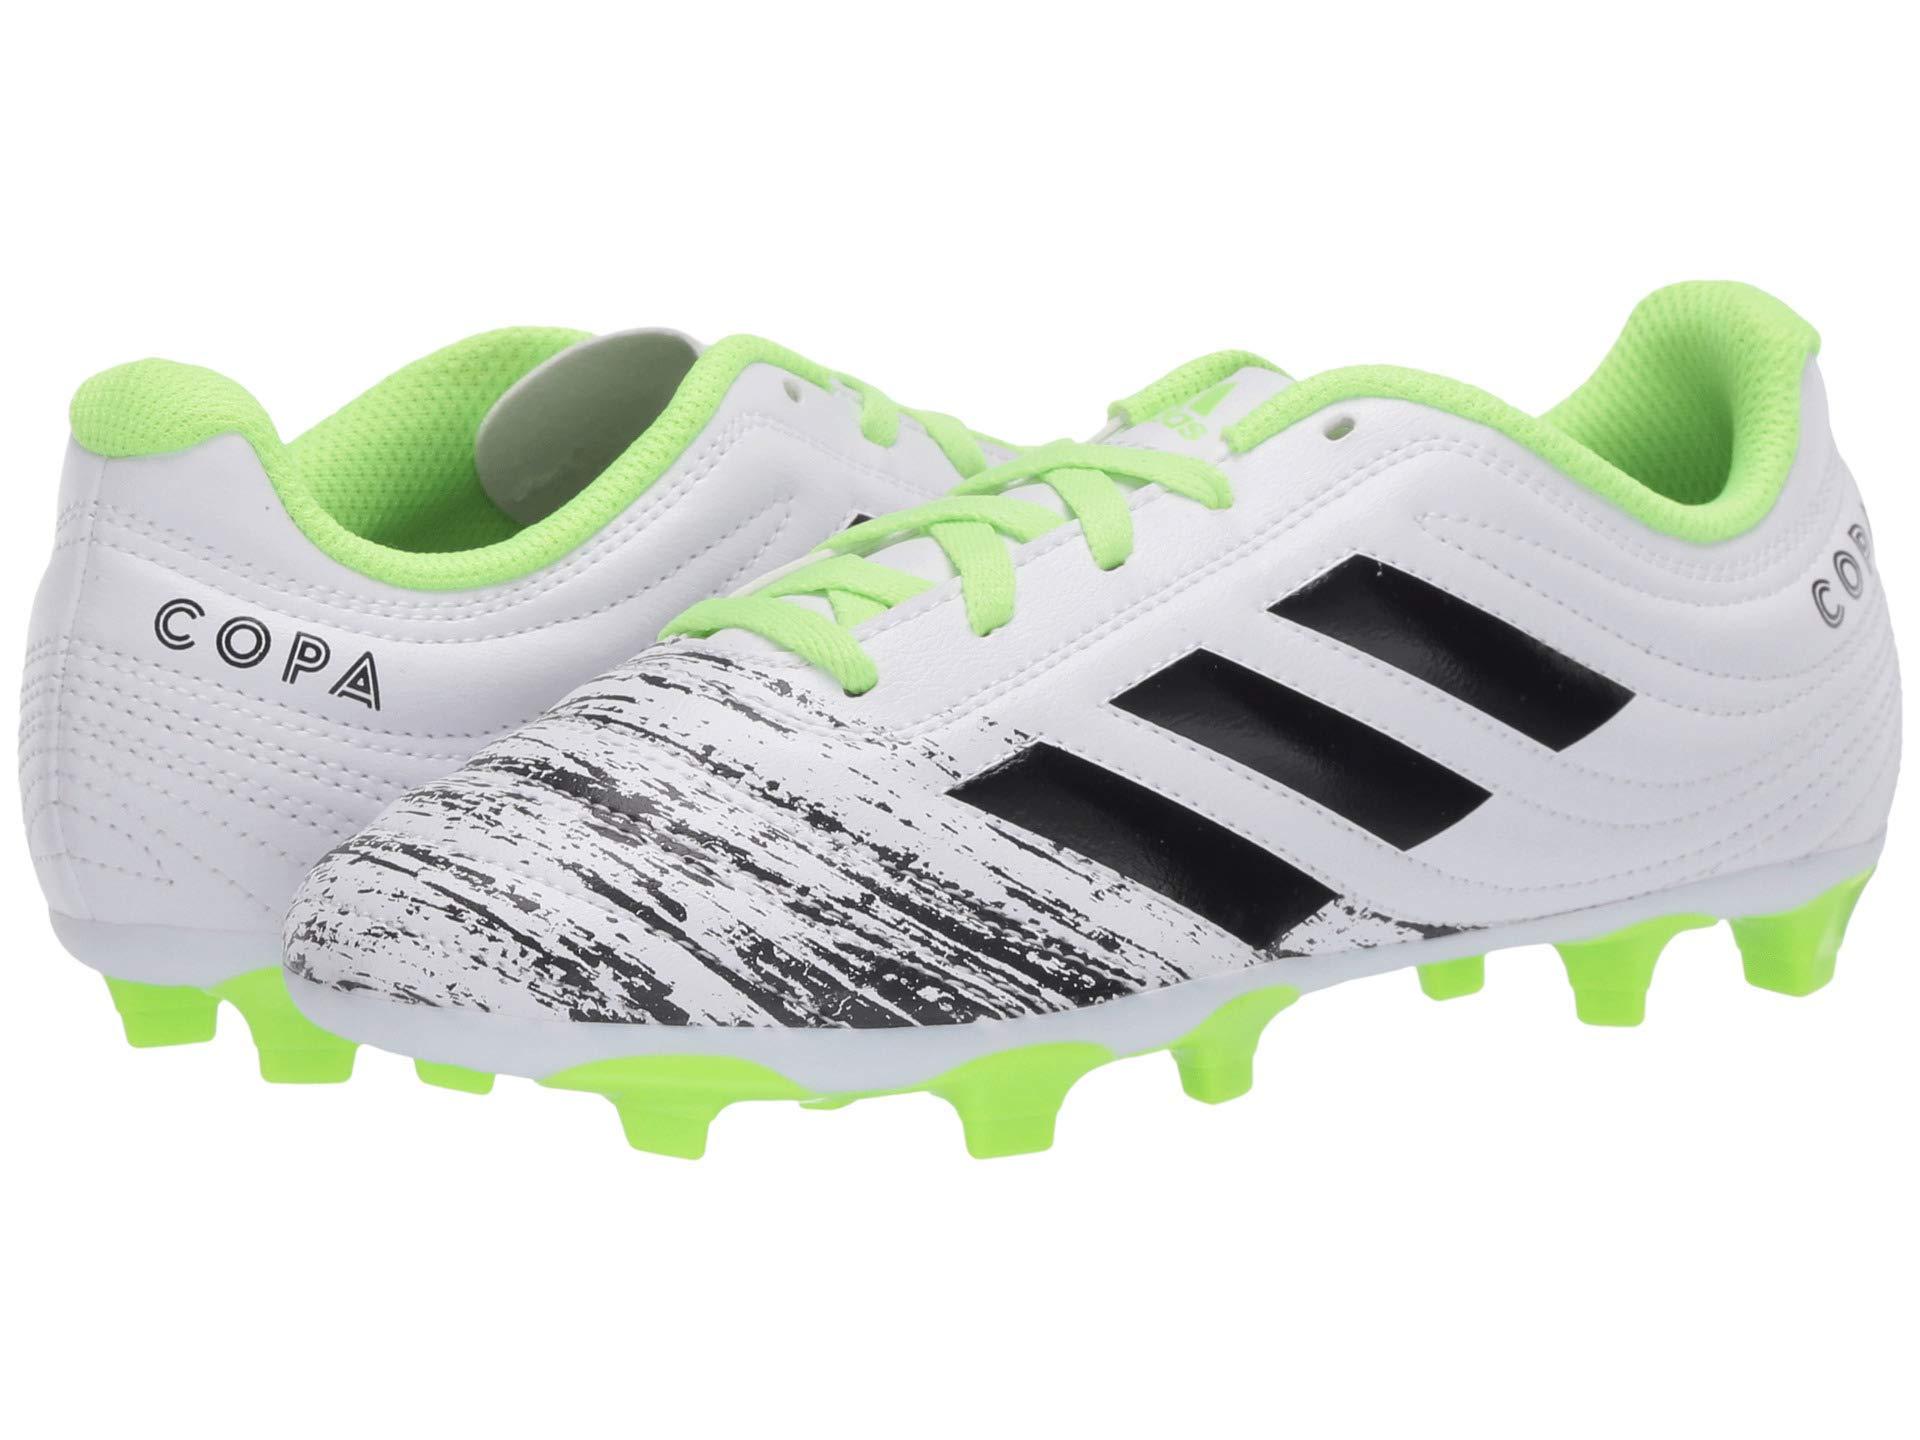 adidas Copa 20.4 Firm Ground Soccer Shoe in Blue/White/Blue (Green) for Men  - Save 66% - Lyst